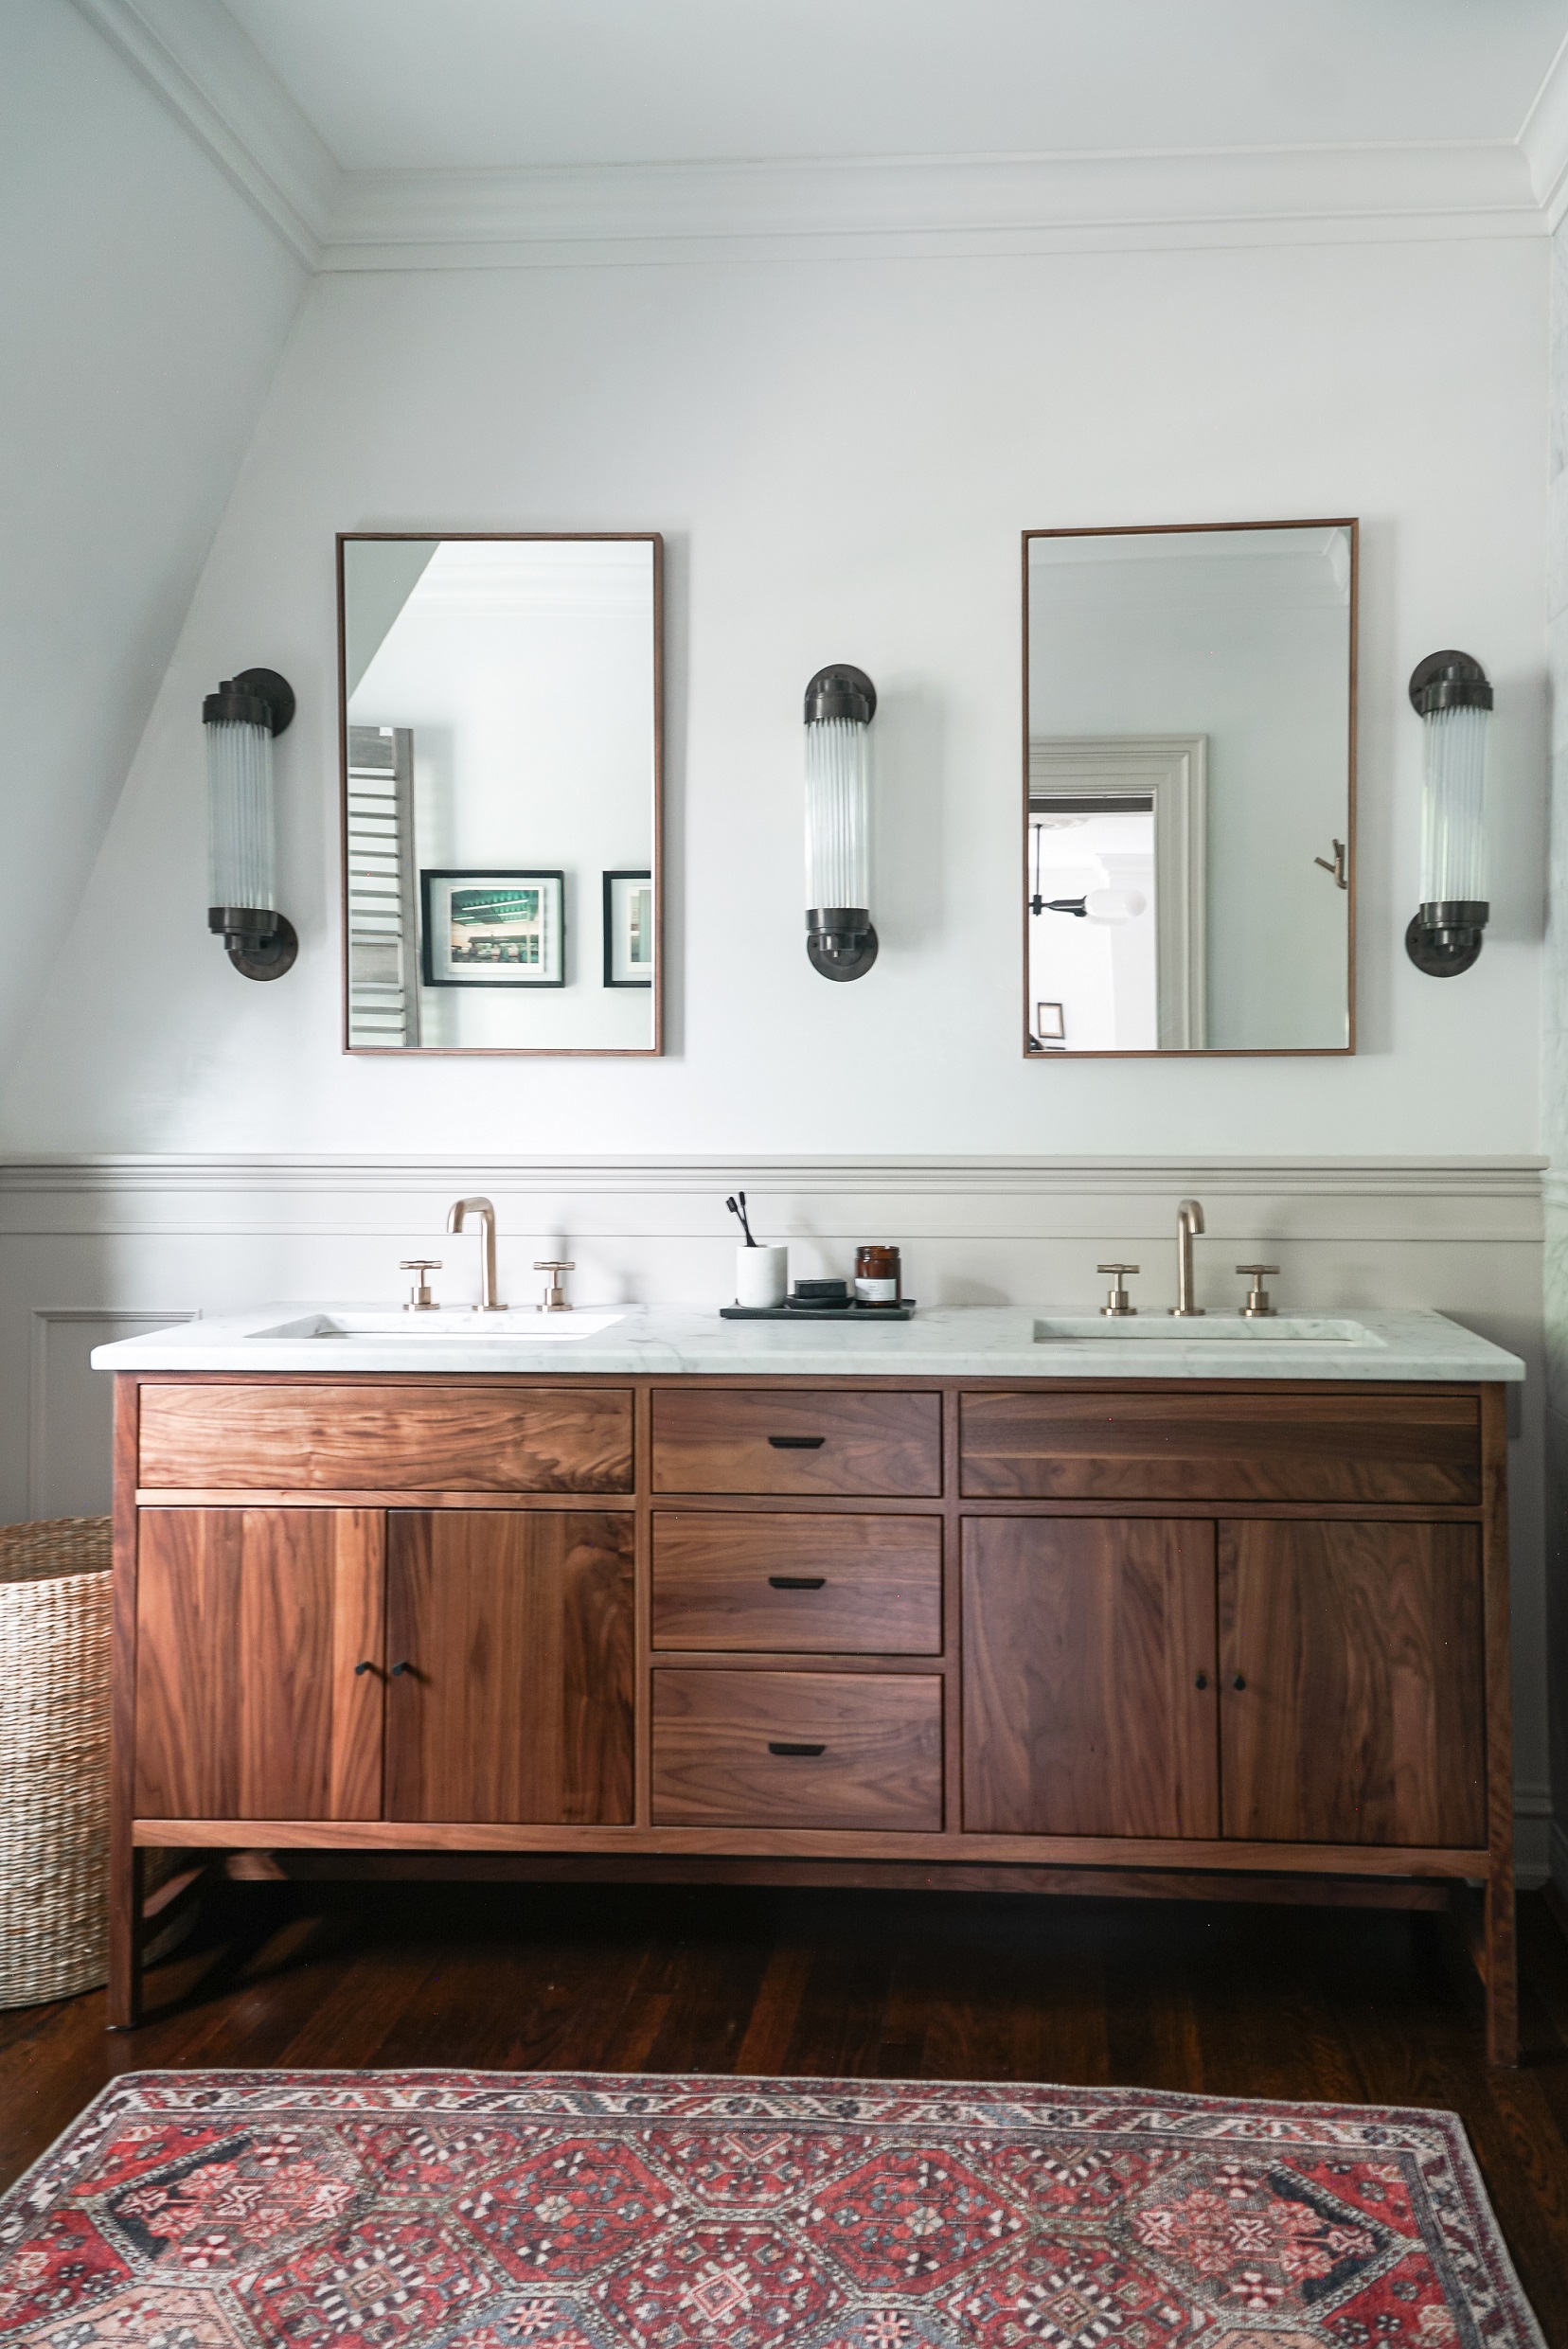 15 Bathroom Lighting Ideas To Brighten Your Space Beautifully Real Homes